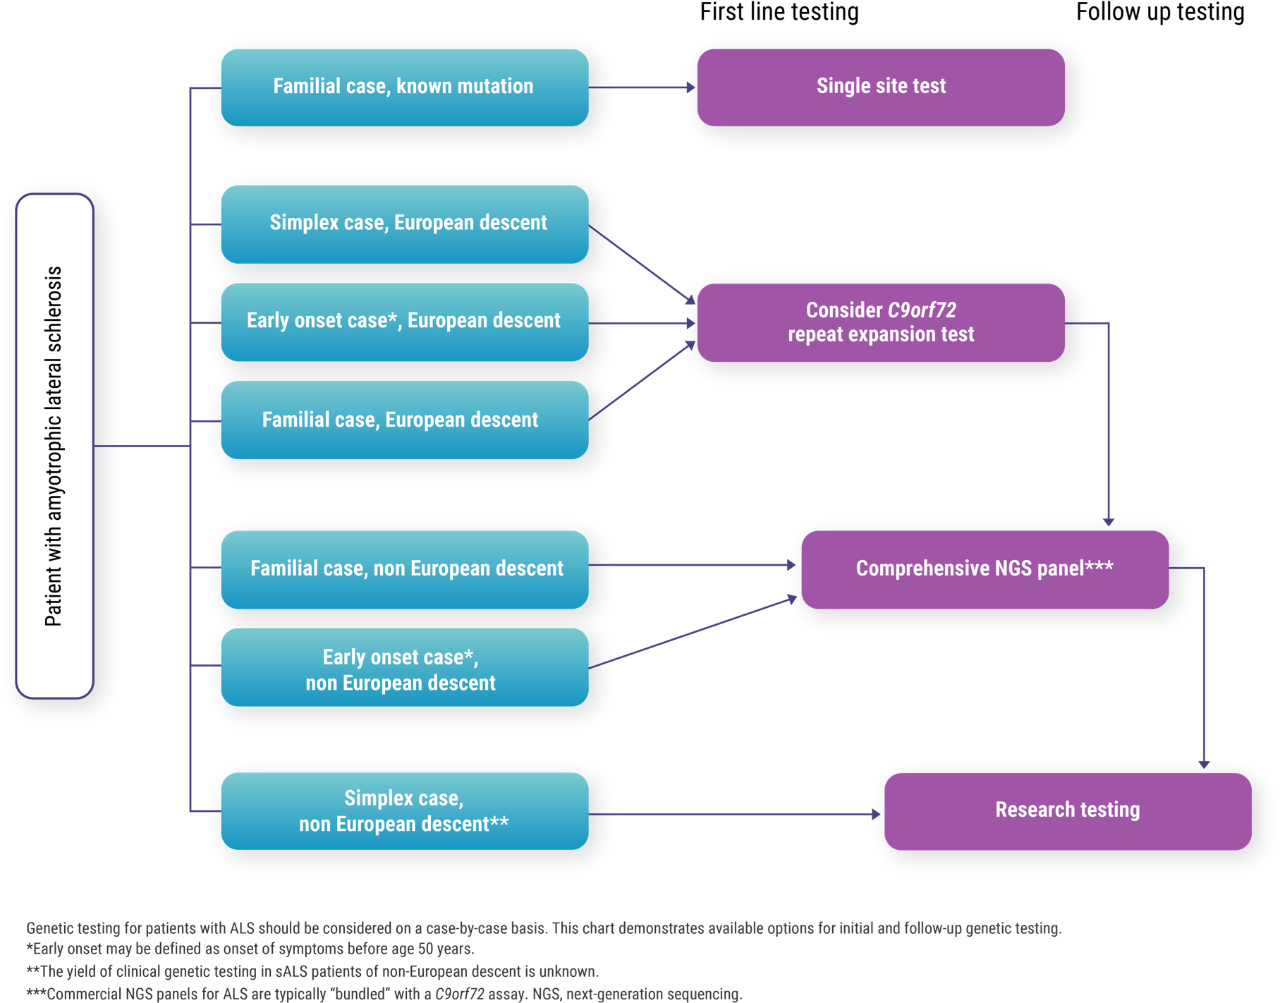 Diagram about available options for initial and follow-up genetic testing.